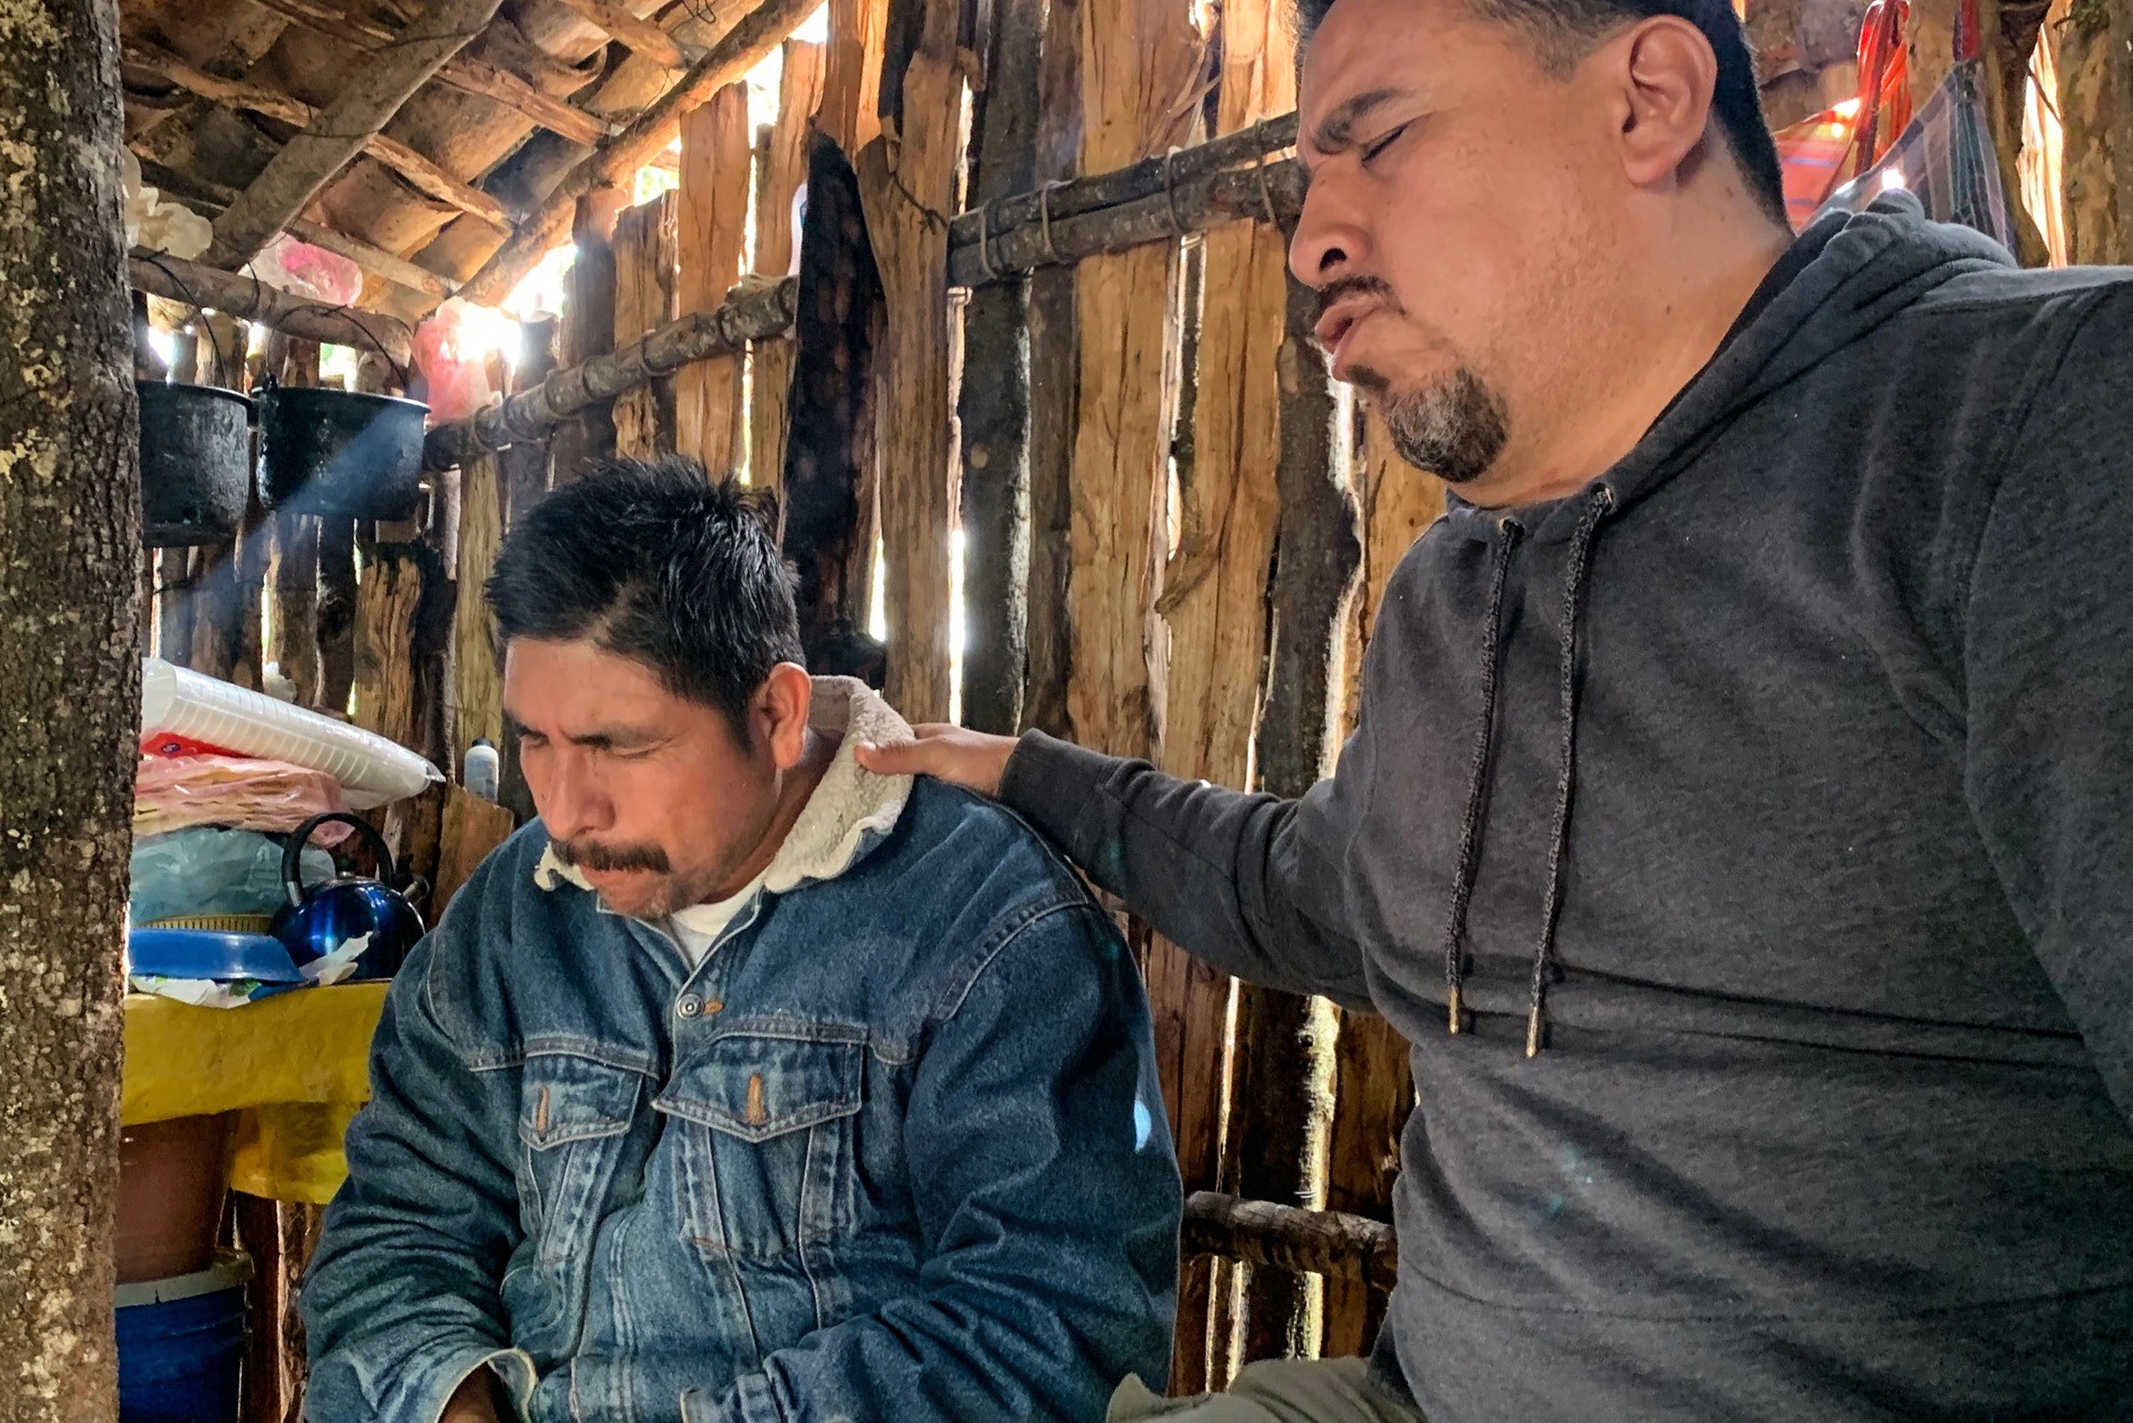 Mexican Christian Evangelist praying for a Mexican man in a shed